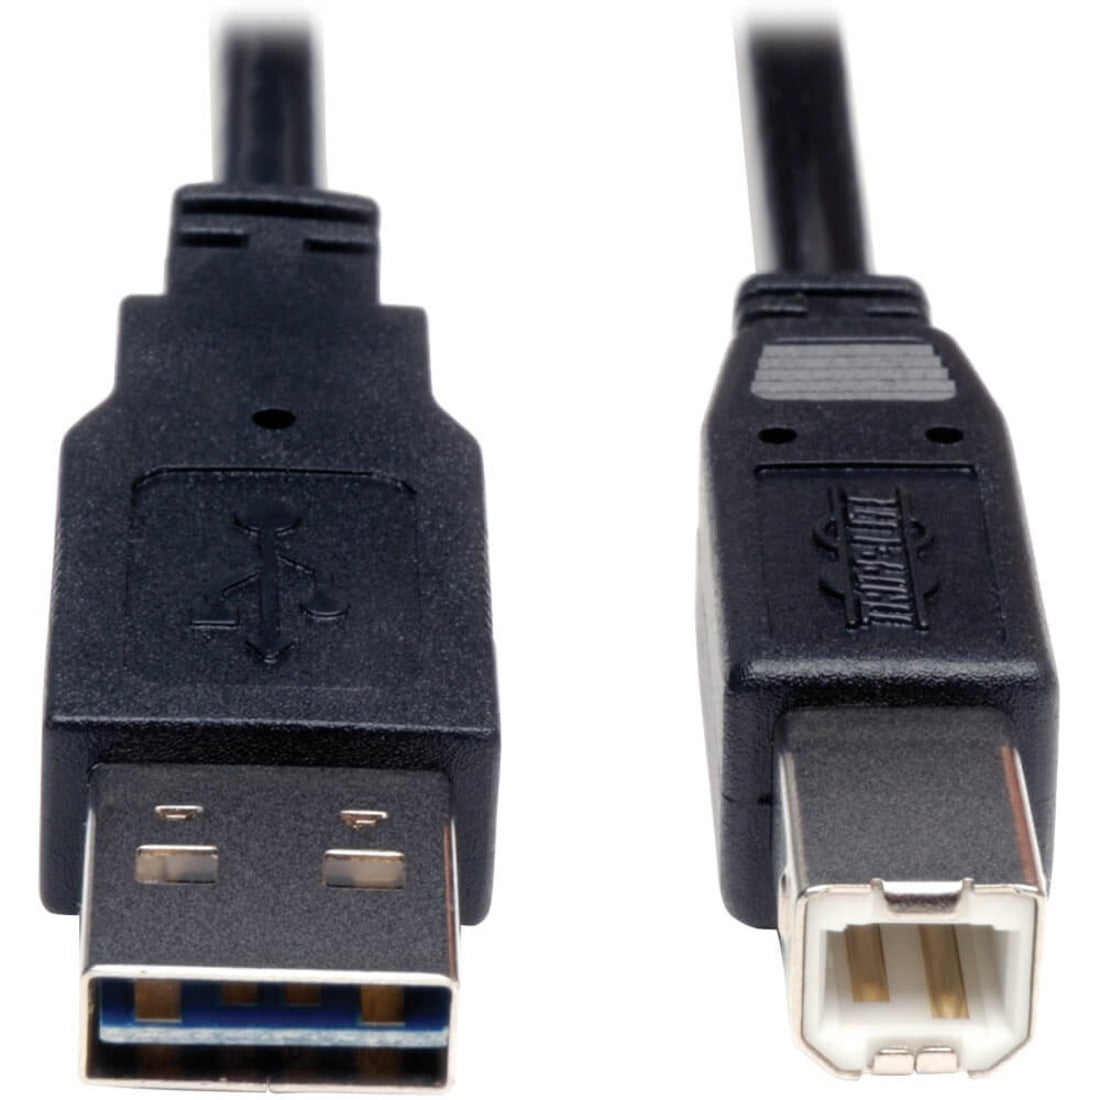 Tripp Lite UR022-003 Universal Reversible USB 2.0 A-Male to B-Male Device Cable, 3ft, Molded, Shielded, Gold Plated